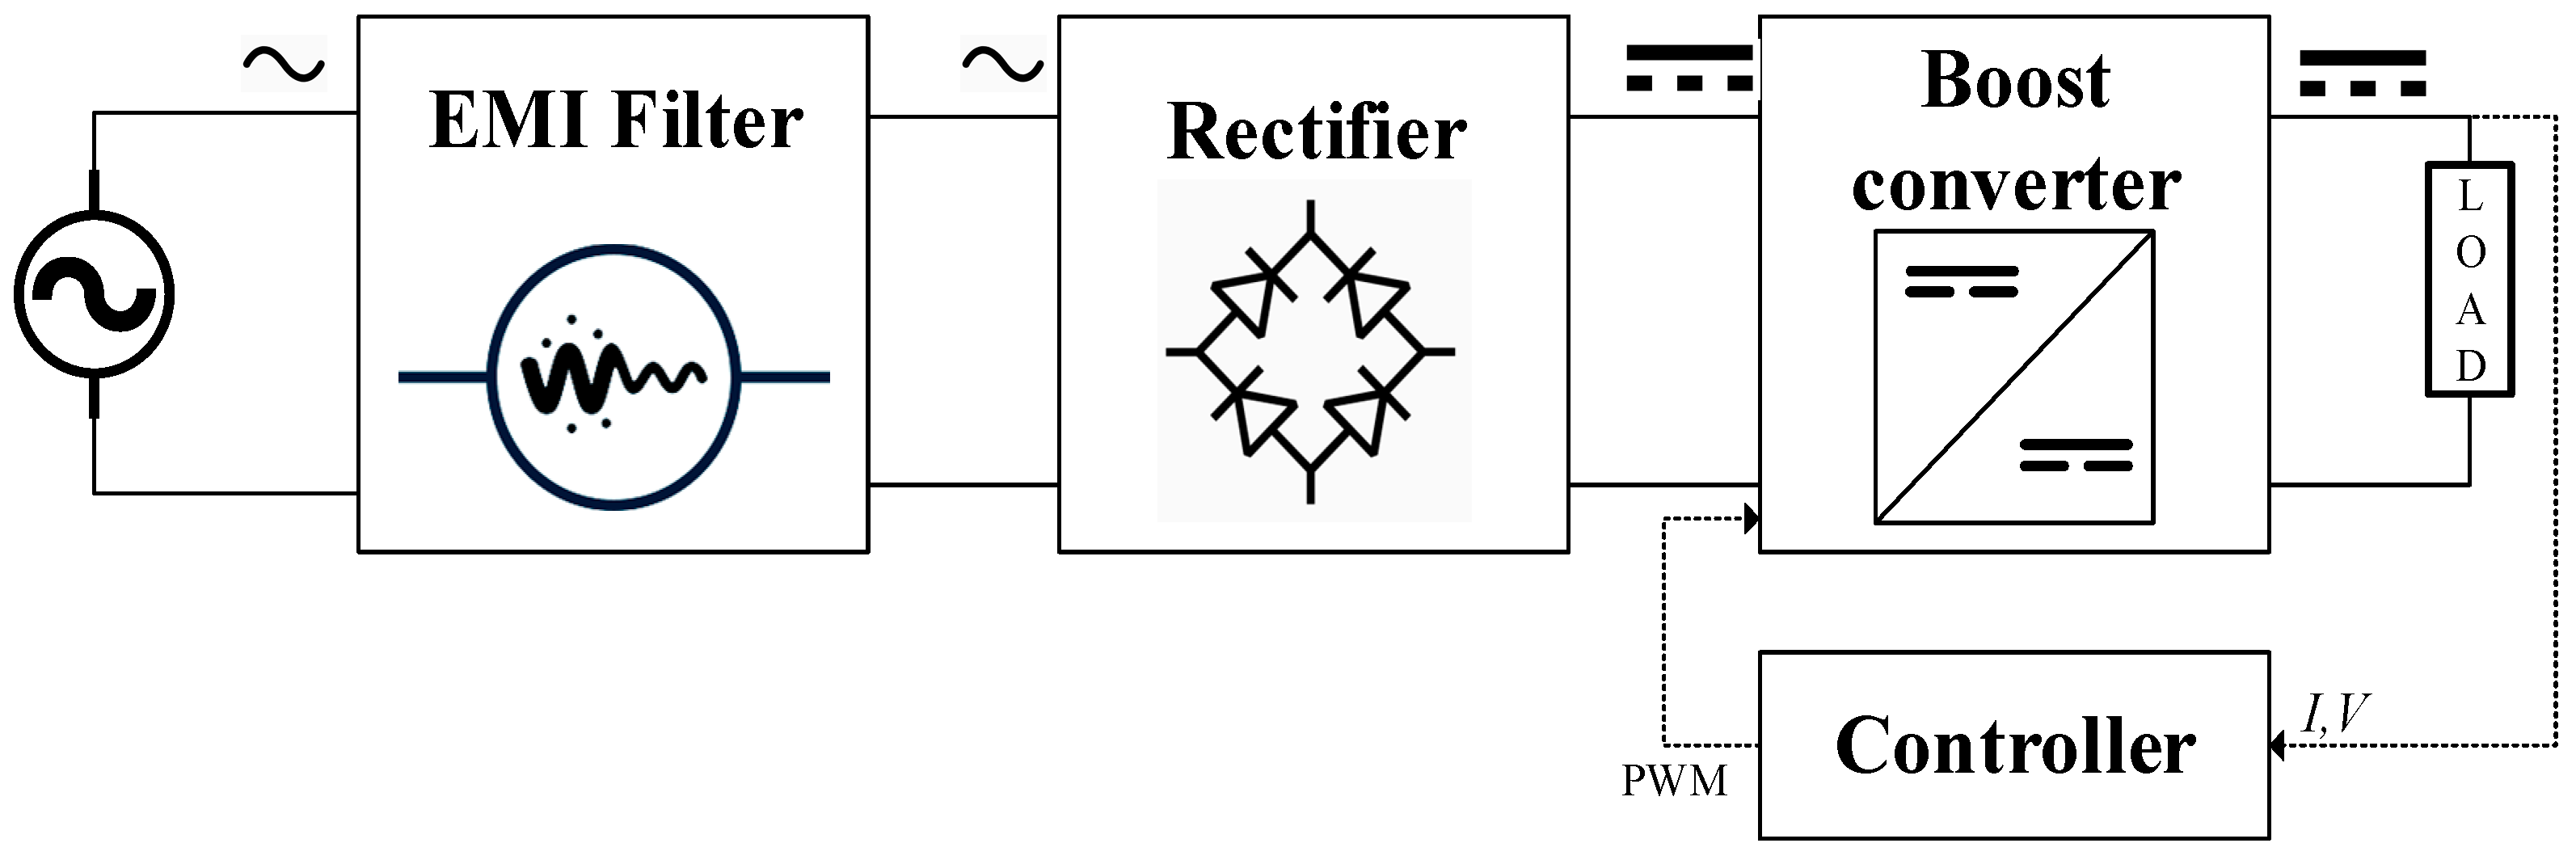 Typical EMI filter for SMPC [3].